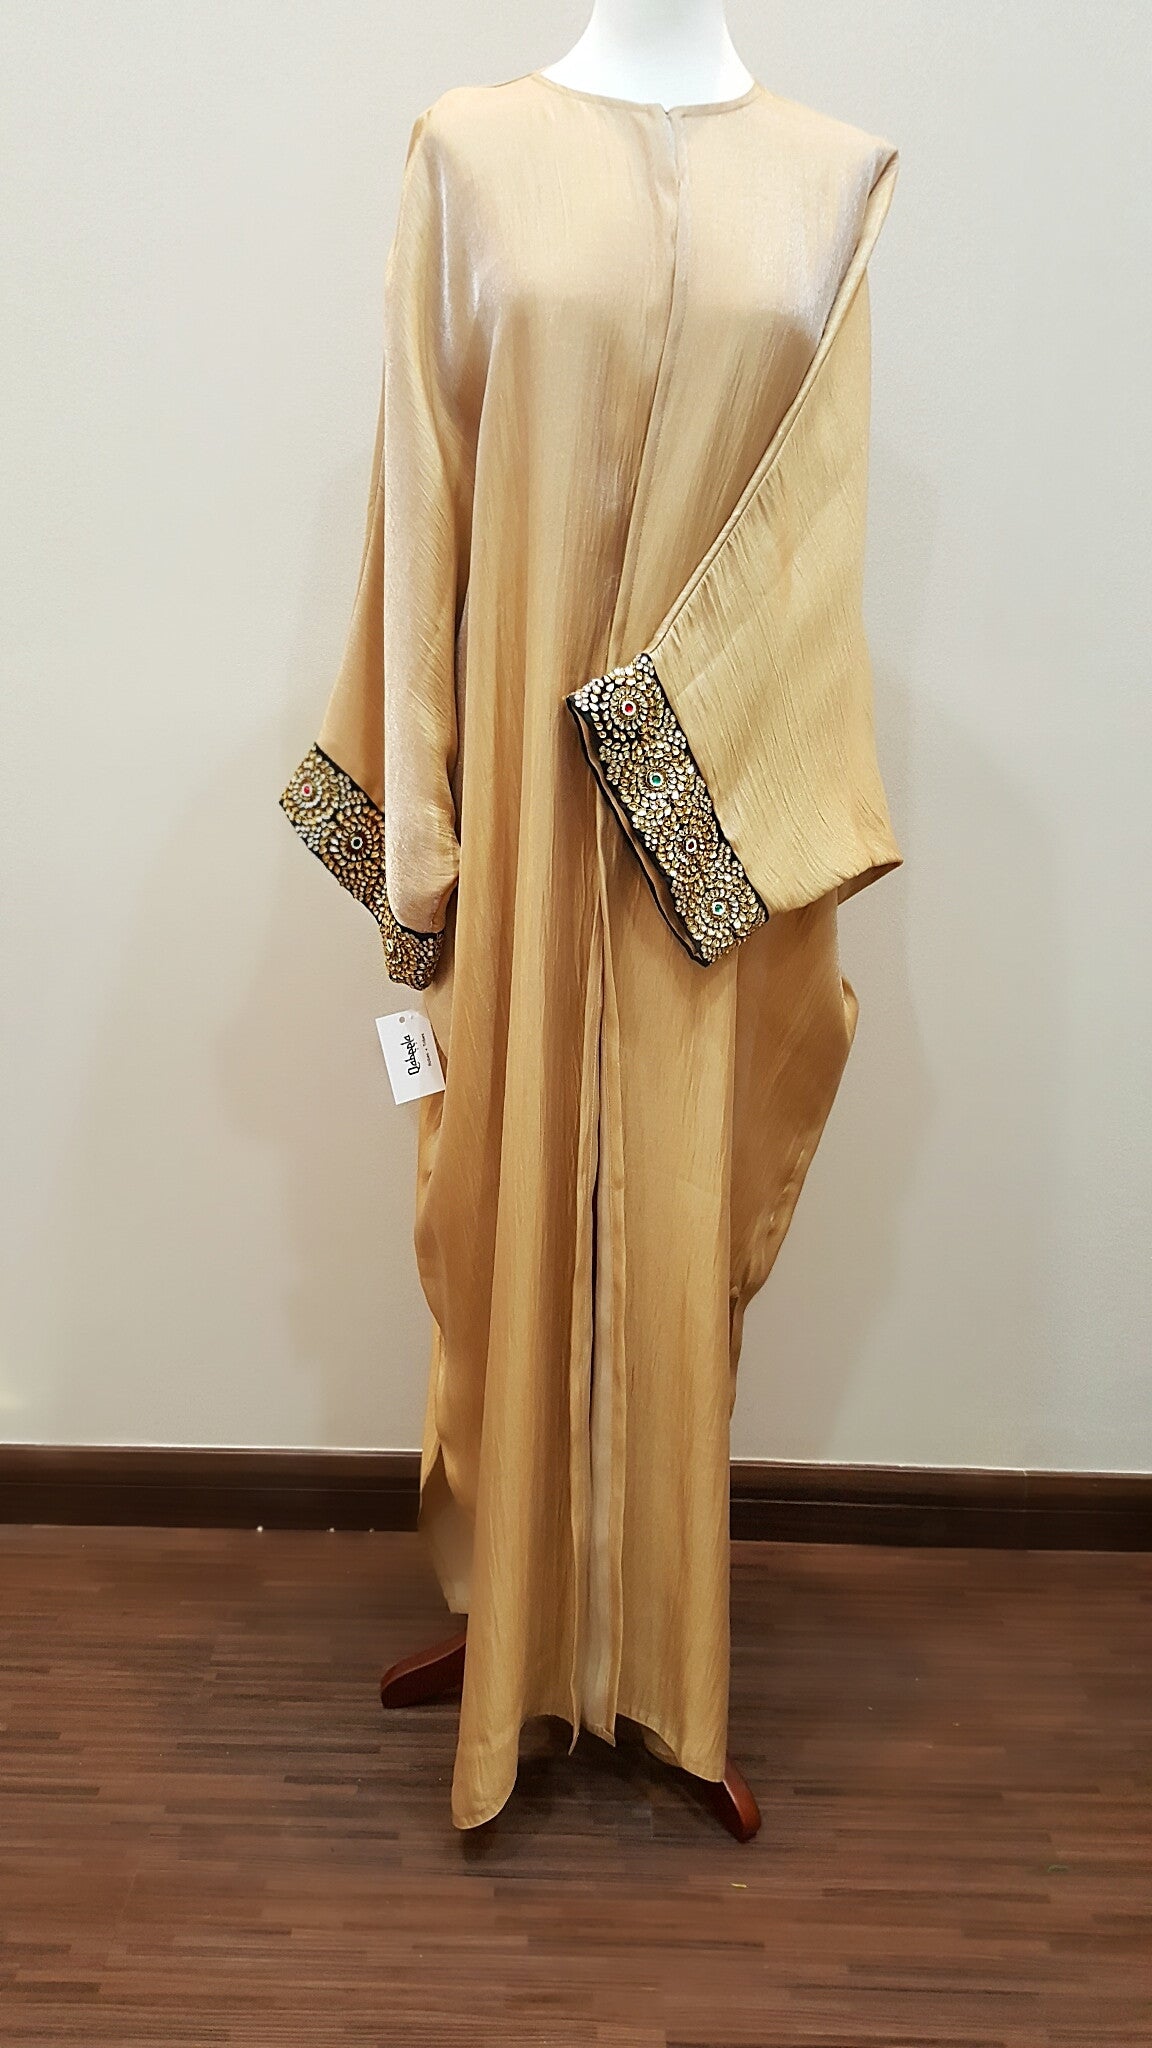 Silk Abaya with exquisite Indian Embroidery in Crystals